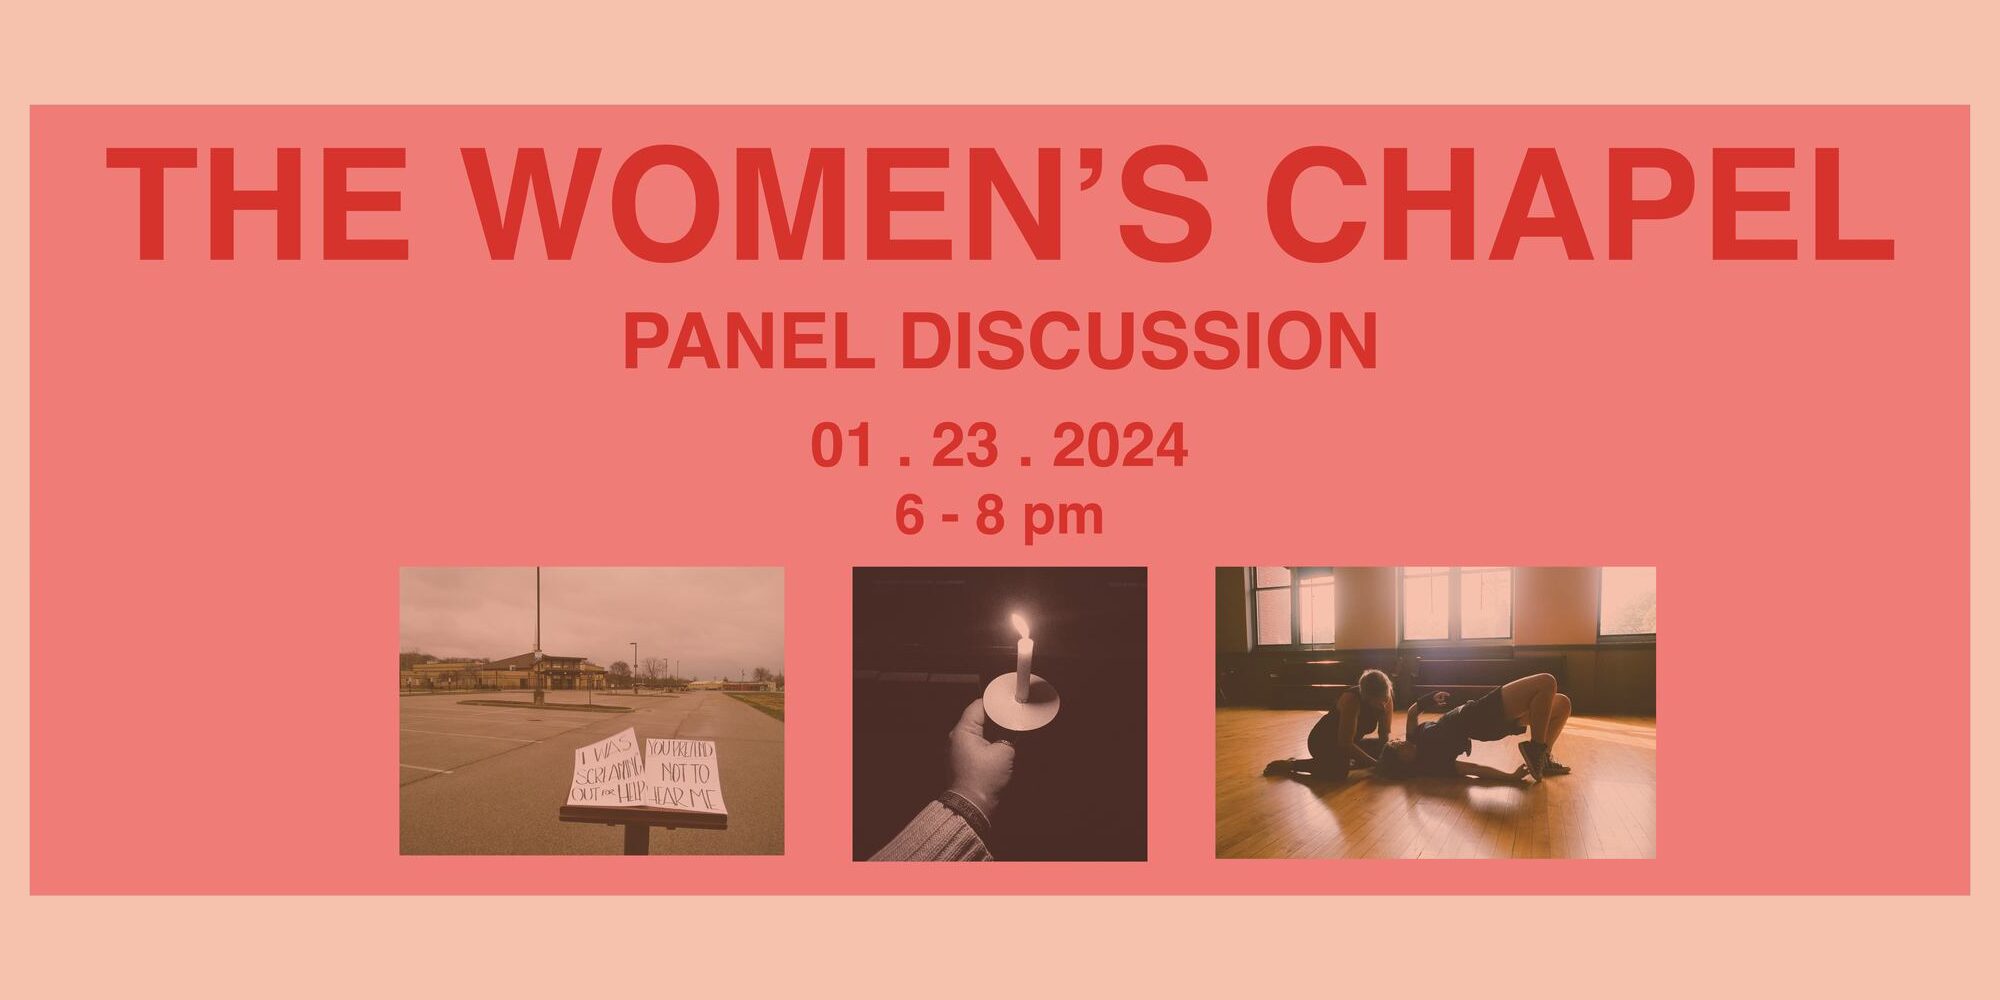 The Women's Chapel panel discussion